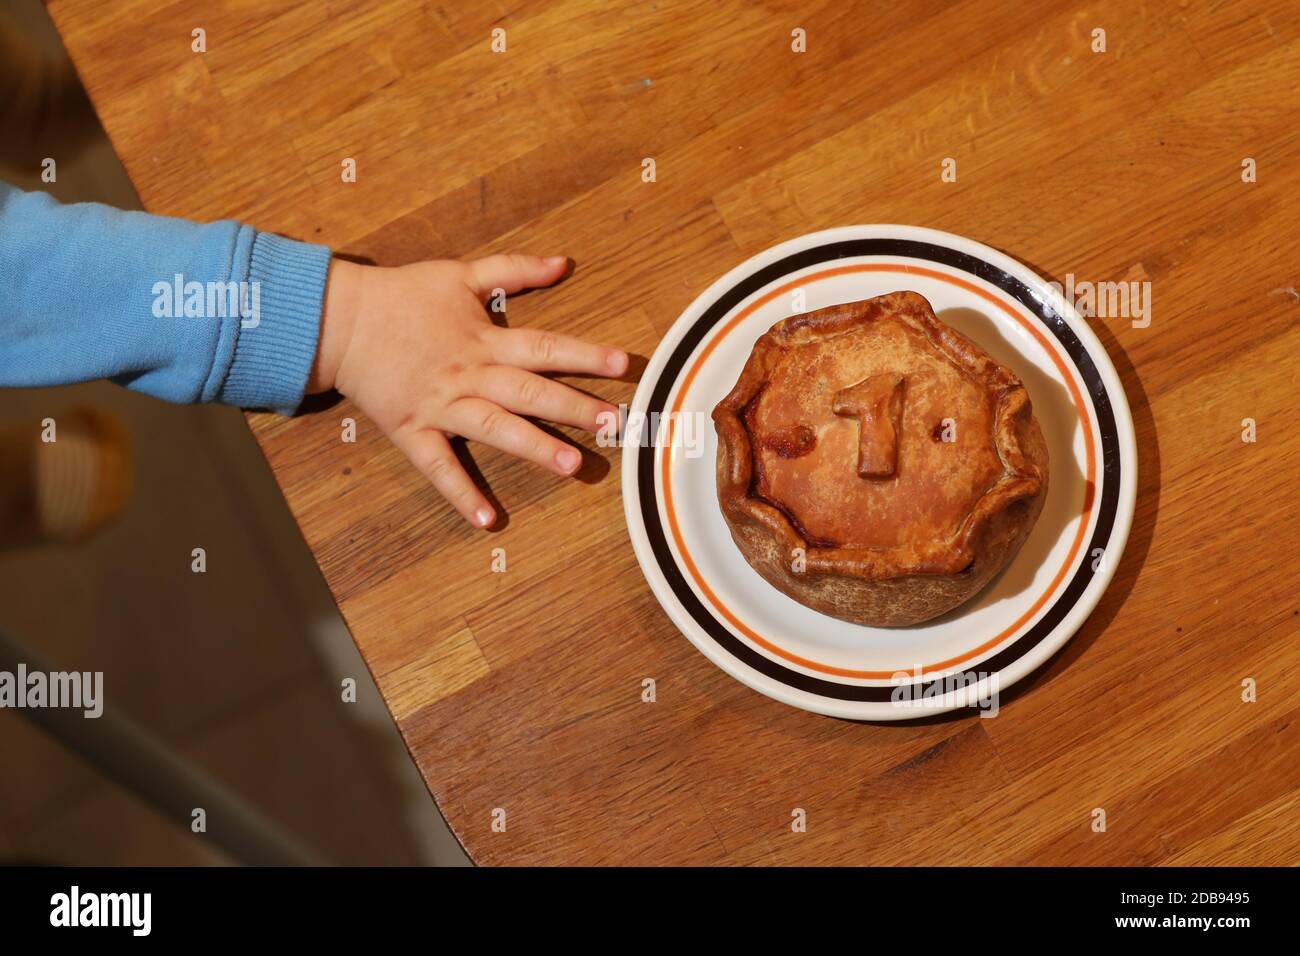 A one year old trying to reach and take a No1 Melton Mowbray Pork Pie pictured in Sussex, UK. Stock Photo